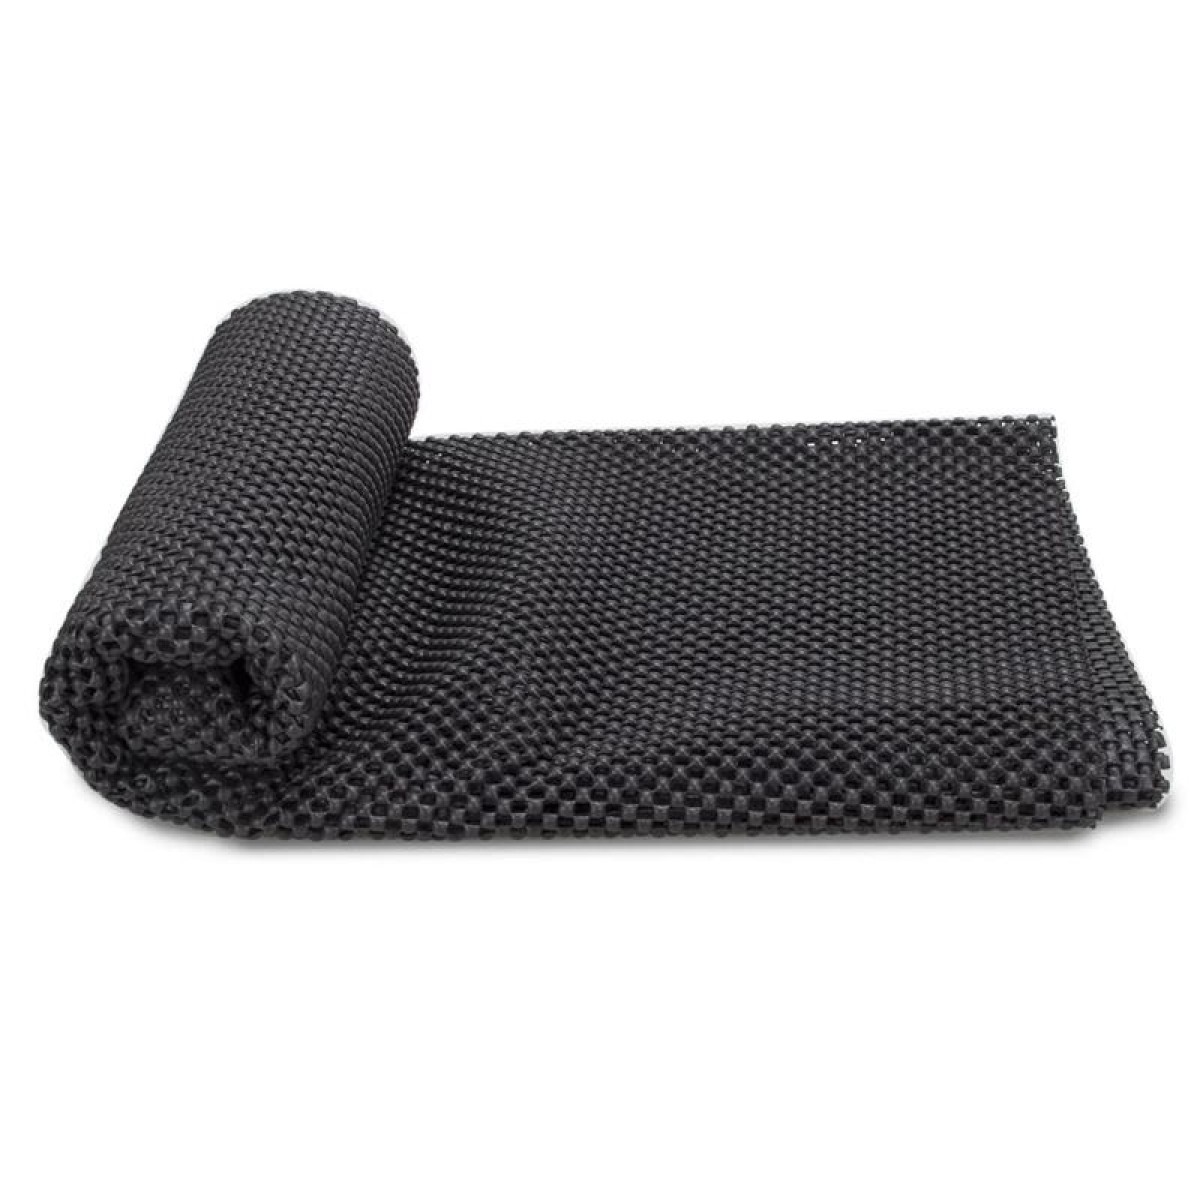 600D Oxford Cloth Car Roof Waterproof Luggage Storage Bag, Style:, 规格: 100x75cm Non-slip Mat